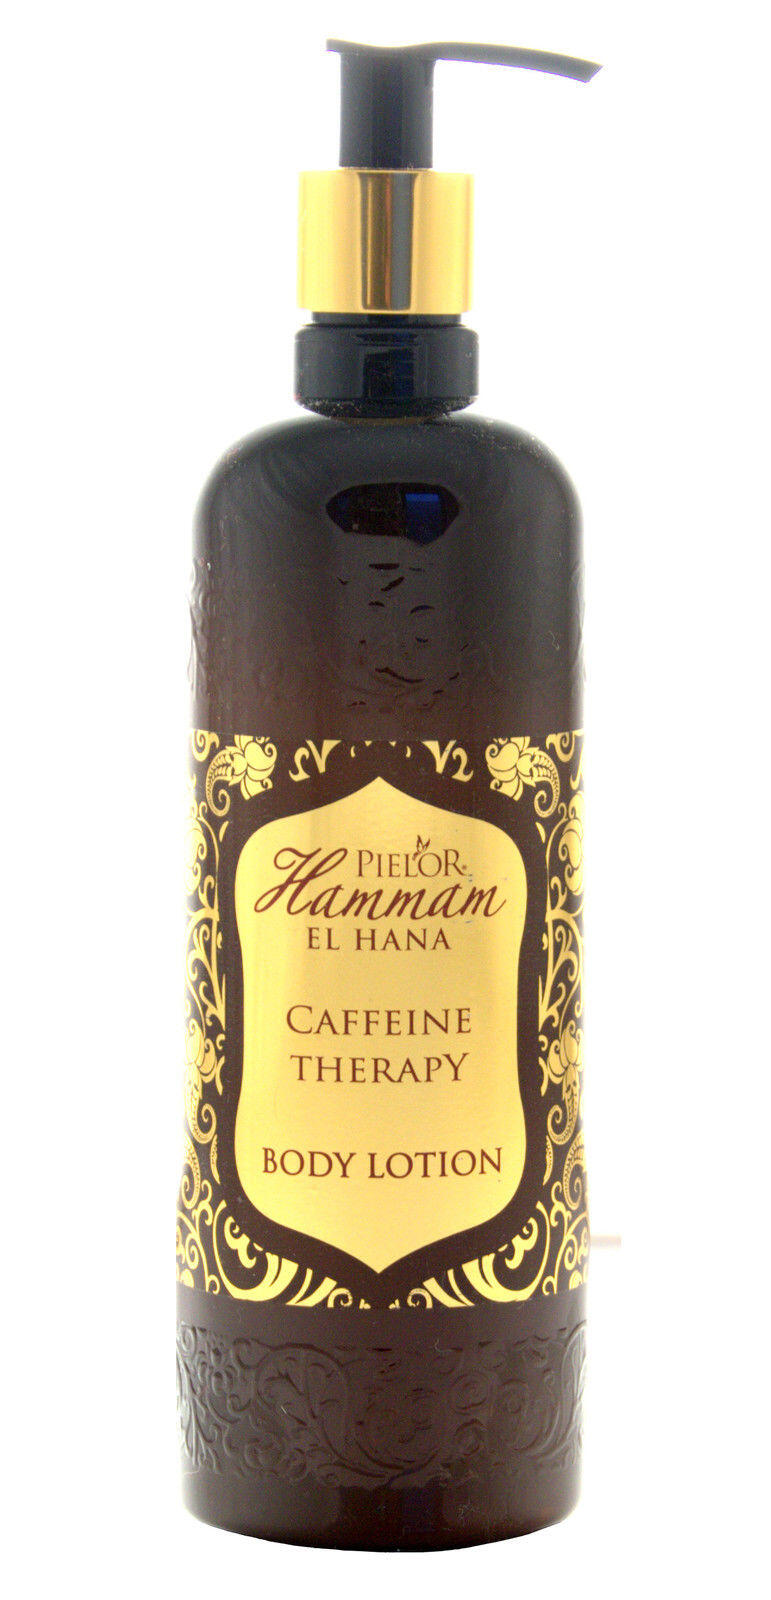 Exclusive Body Lotion Caffeine Therapy by Pielor